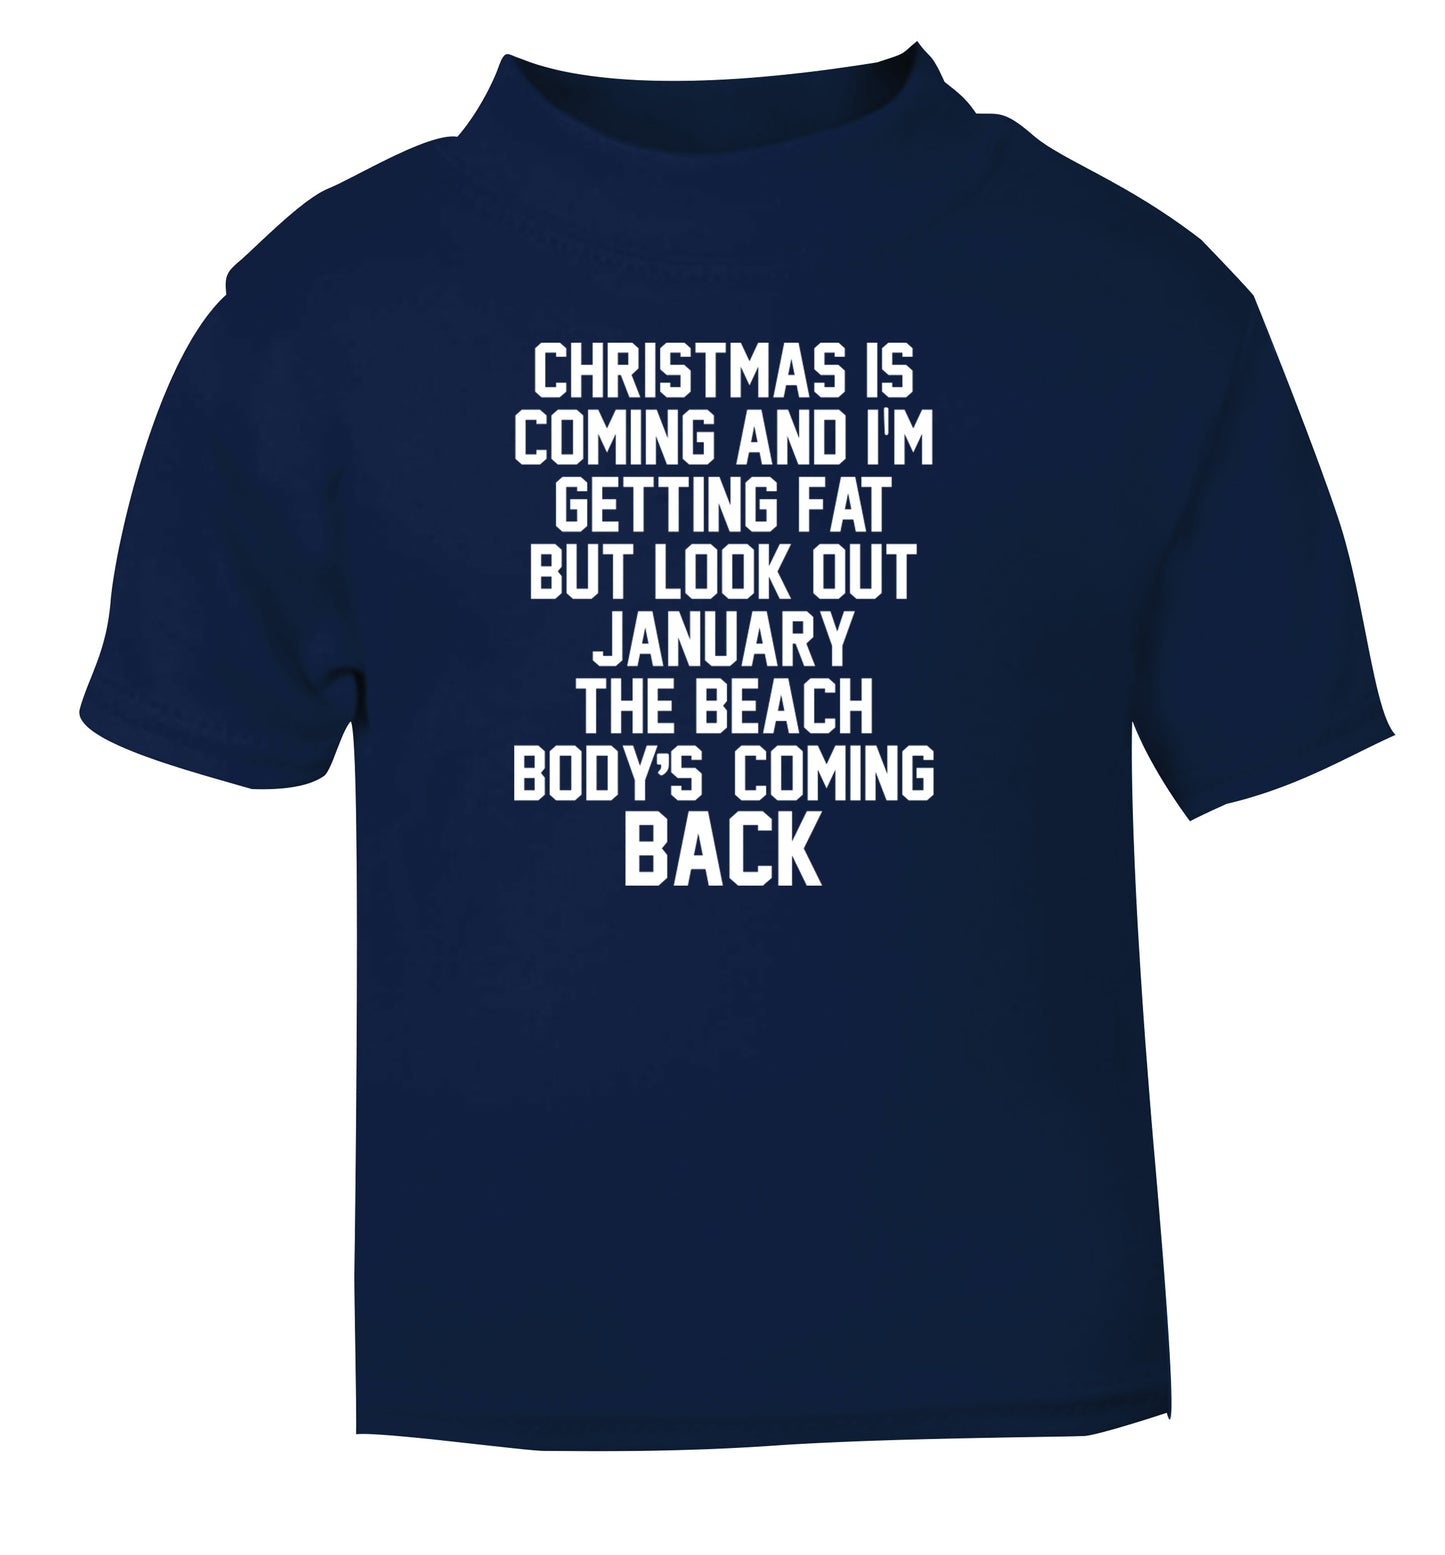 Christmas is coming and I'm getting fat but look out January the beach body's coming back! navy Baby Toddler Tshirt 2 Years